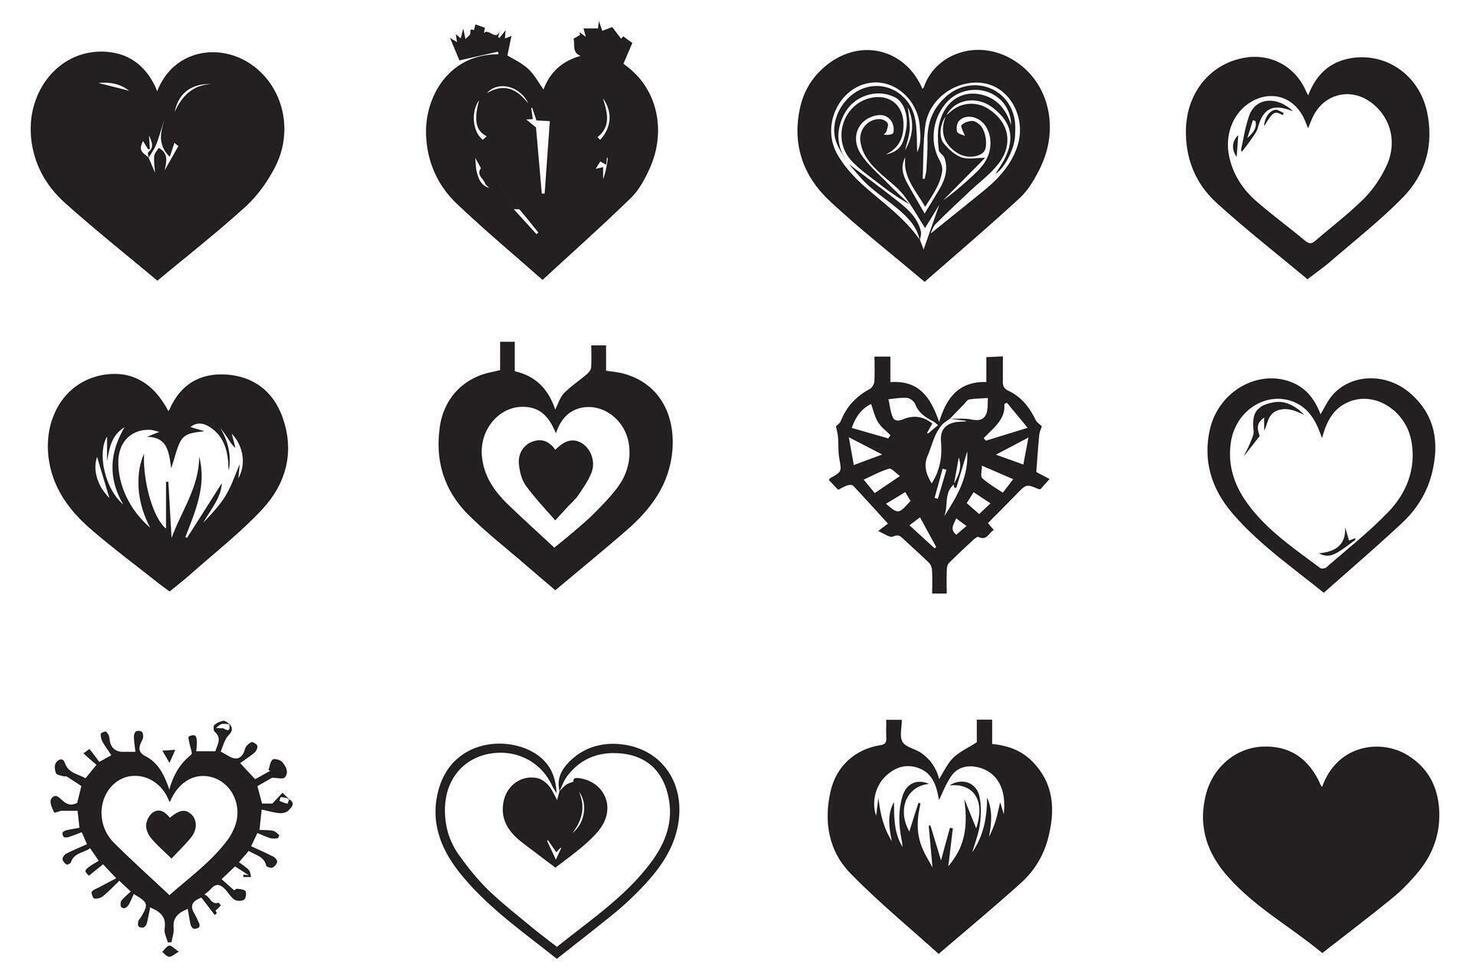 Hearts silhouette icon bundle collection free vector